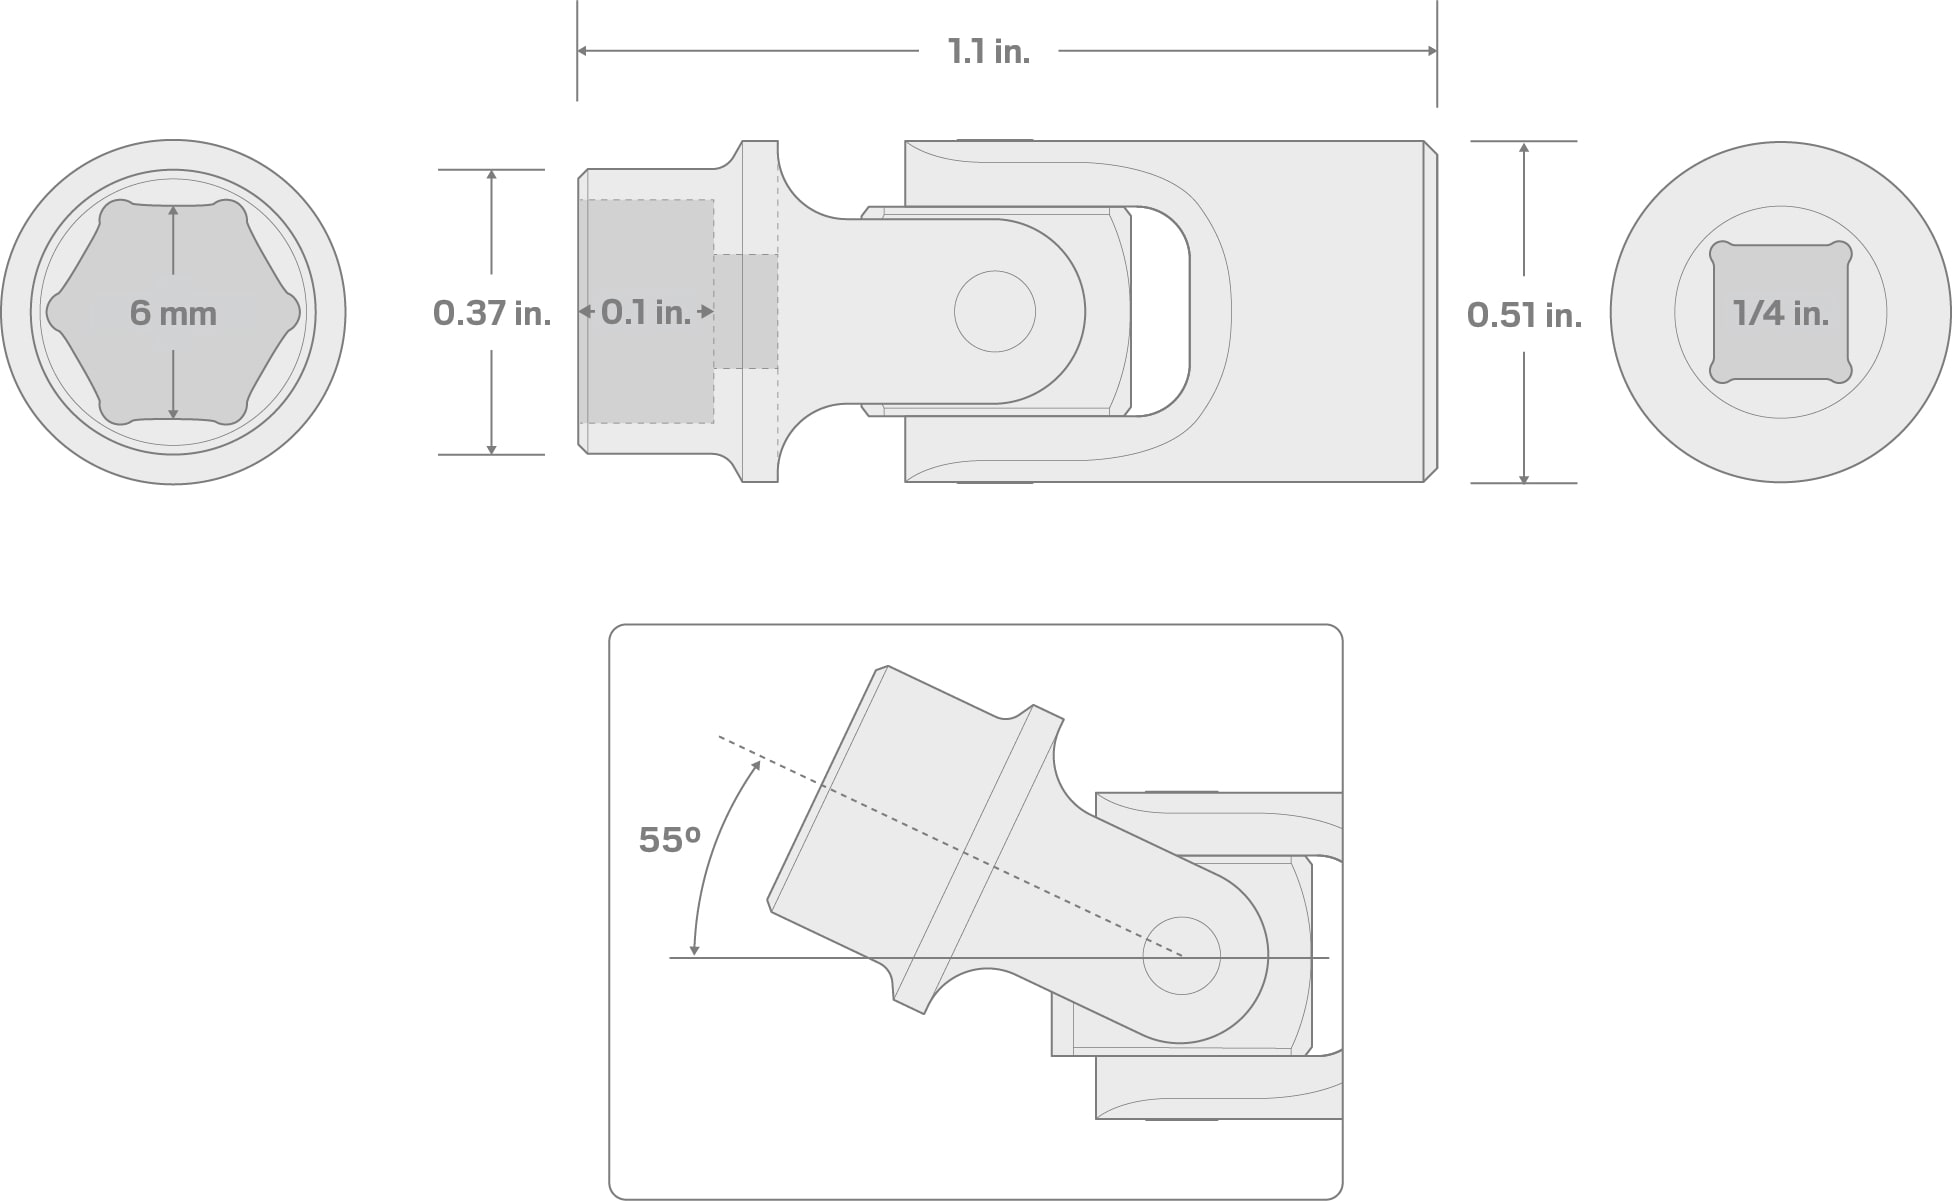 Specs for 1/4 Inch Drive x 6 mm Universal Joint Socket